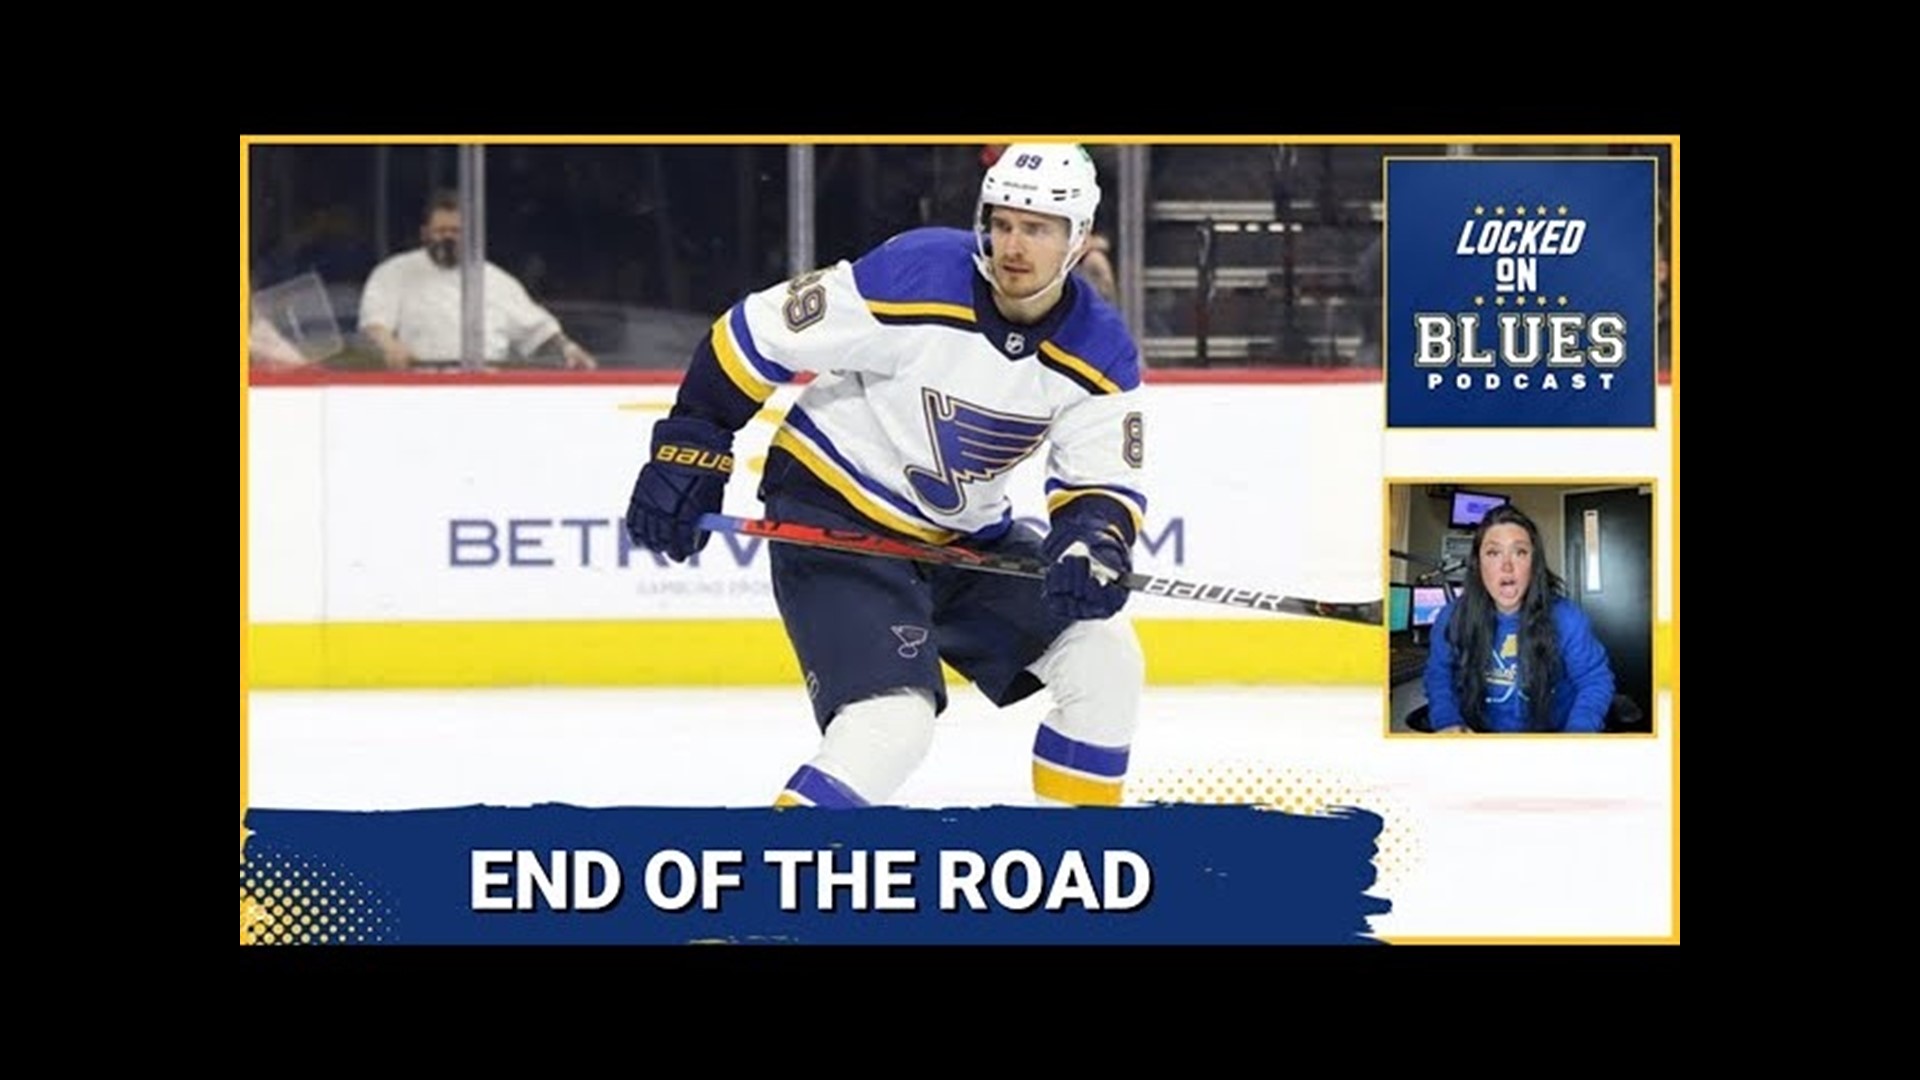 The St. Louis Blues hit the ice one last time this season. While this season didn't go the way we wanted it to it's still nice to watch some Blues hockey.